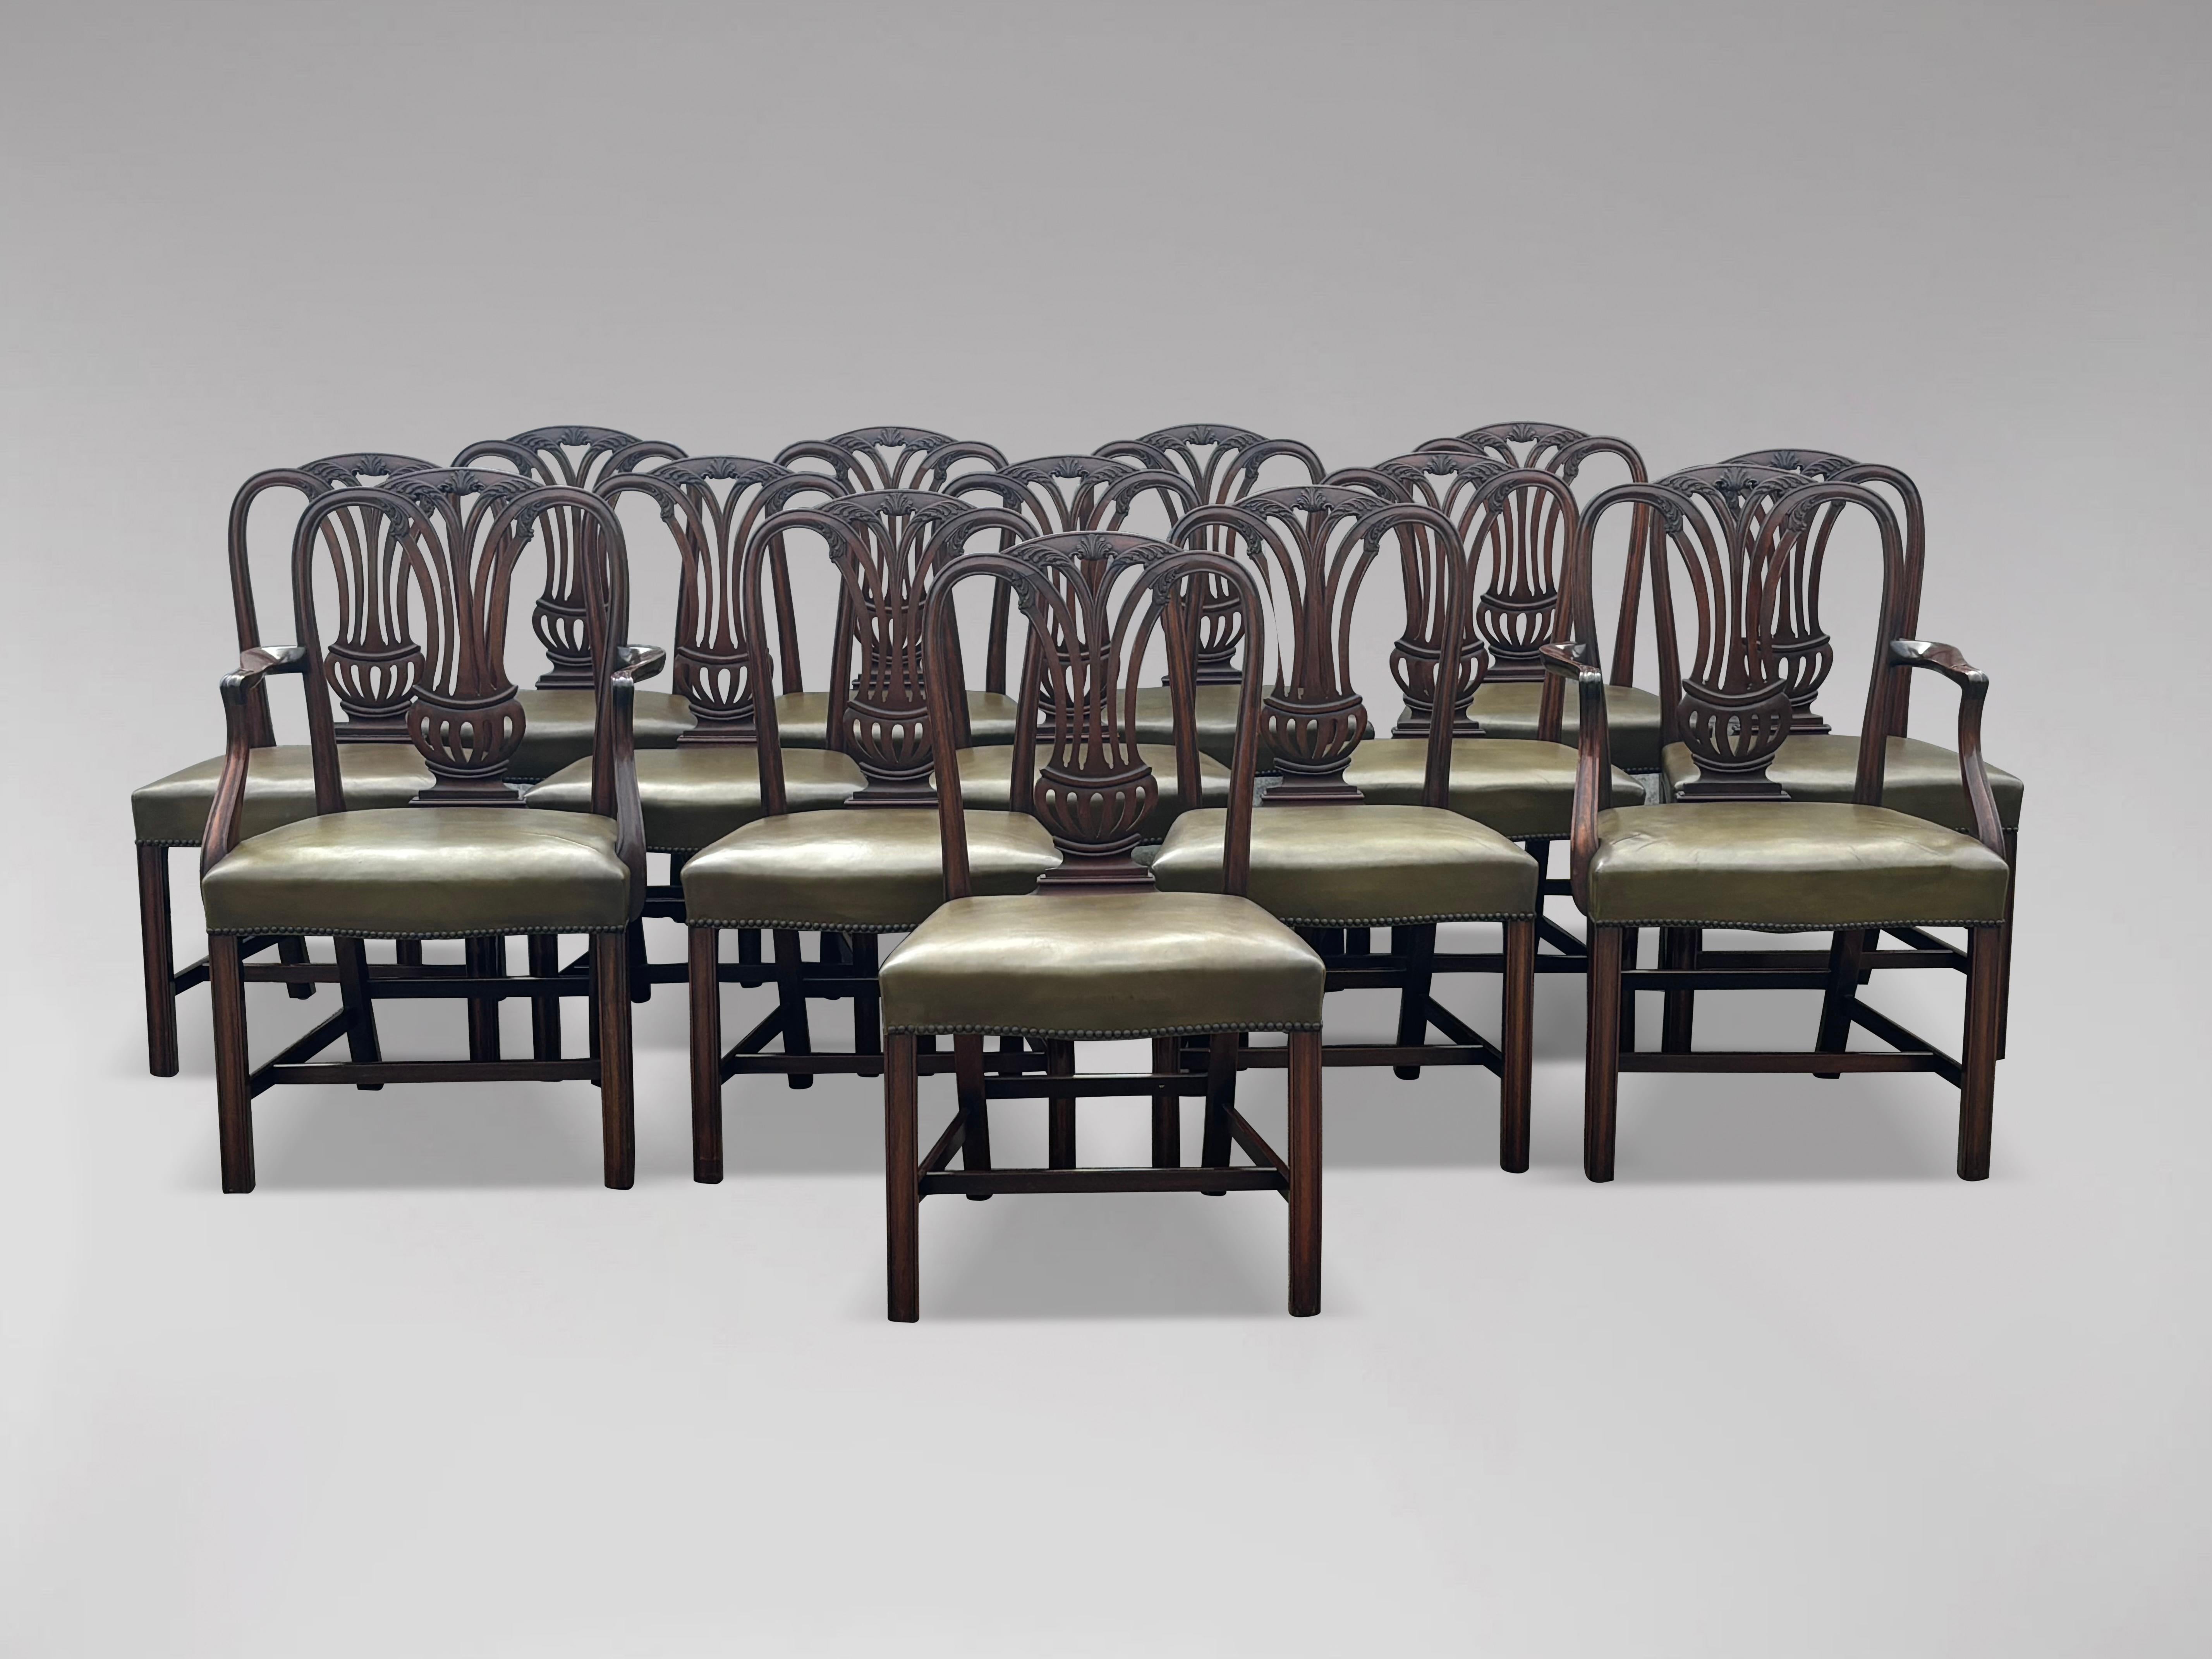 A quality large set of 14 Georgian Hepplewhite style mahogany dining chairs of good colour and condition with broad reupholstered leather seats, generously wide in profile, affording comfortable seating. This large set of 2 armchairs and 12 dining